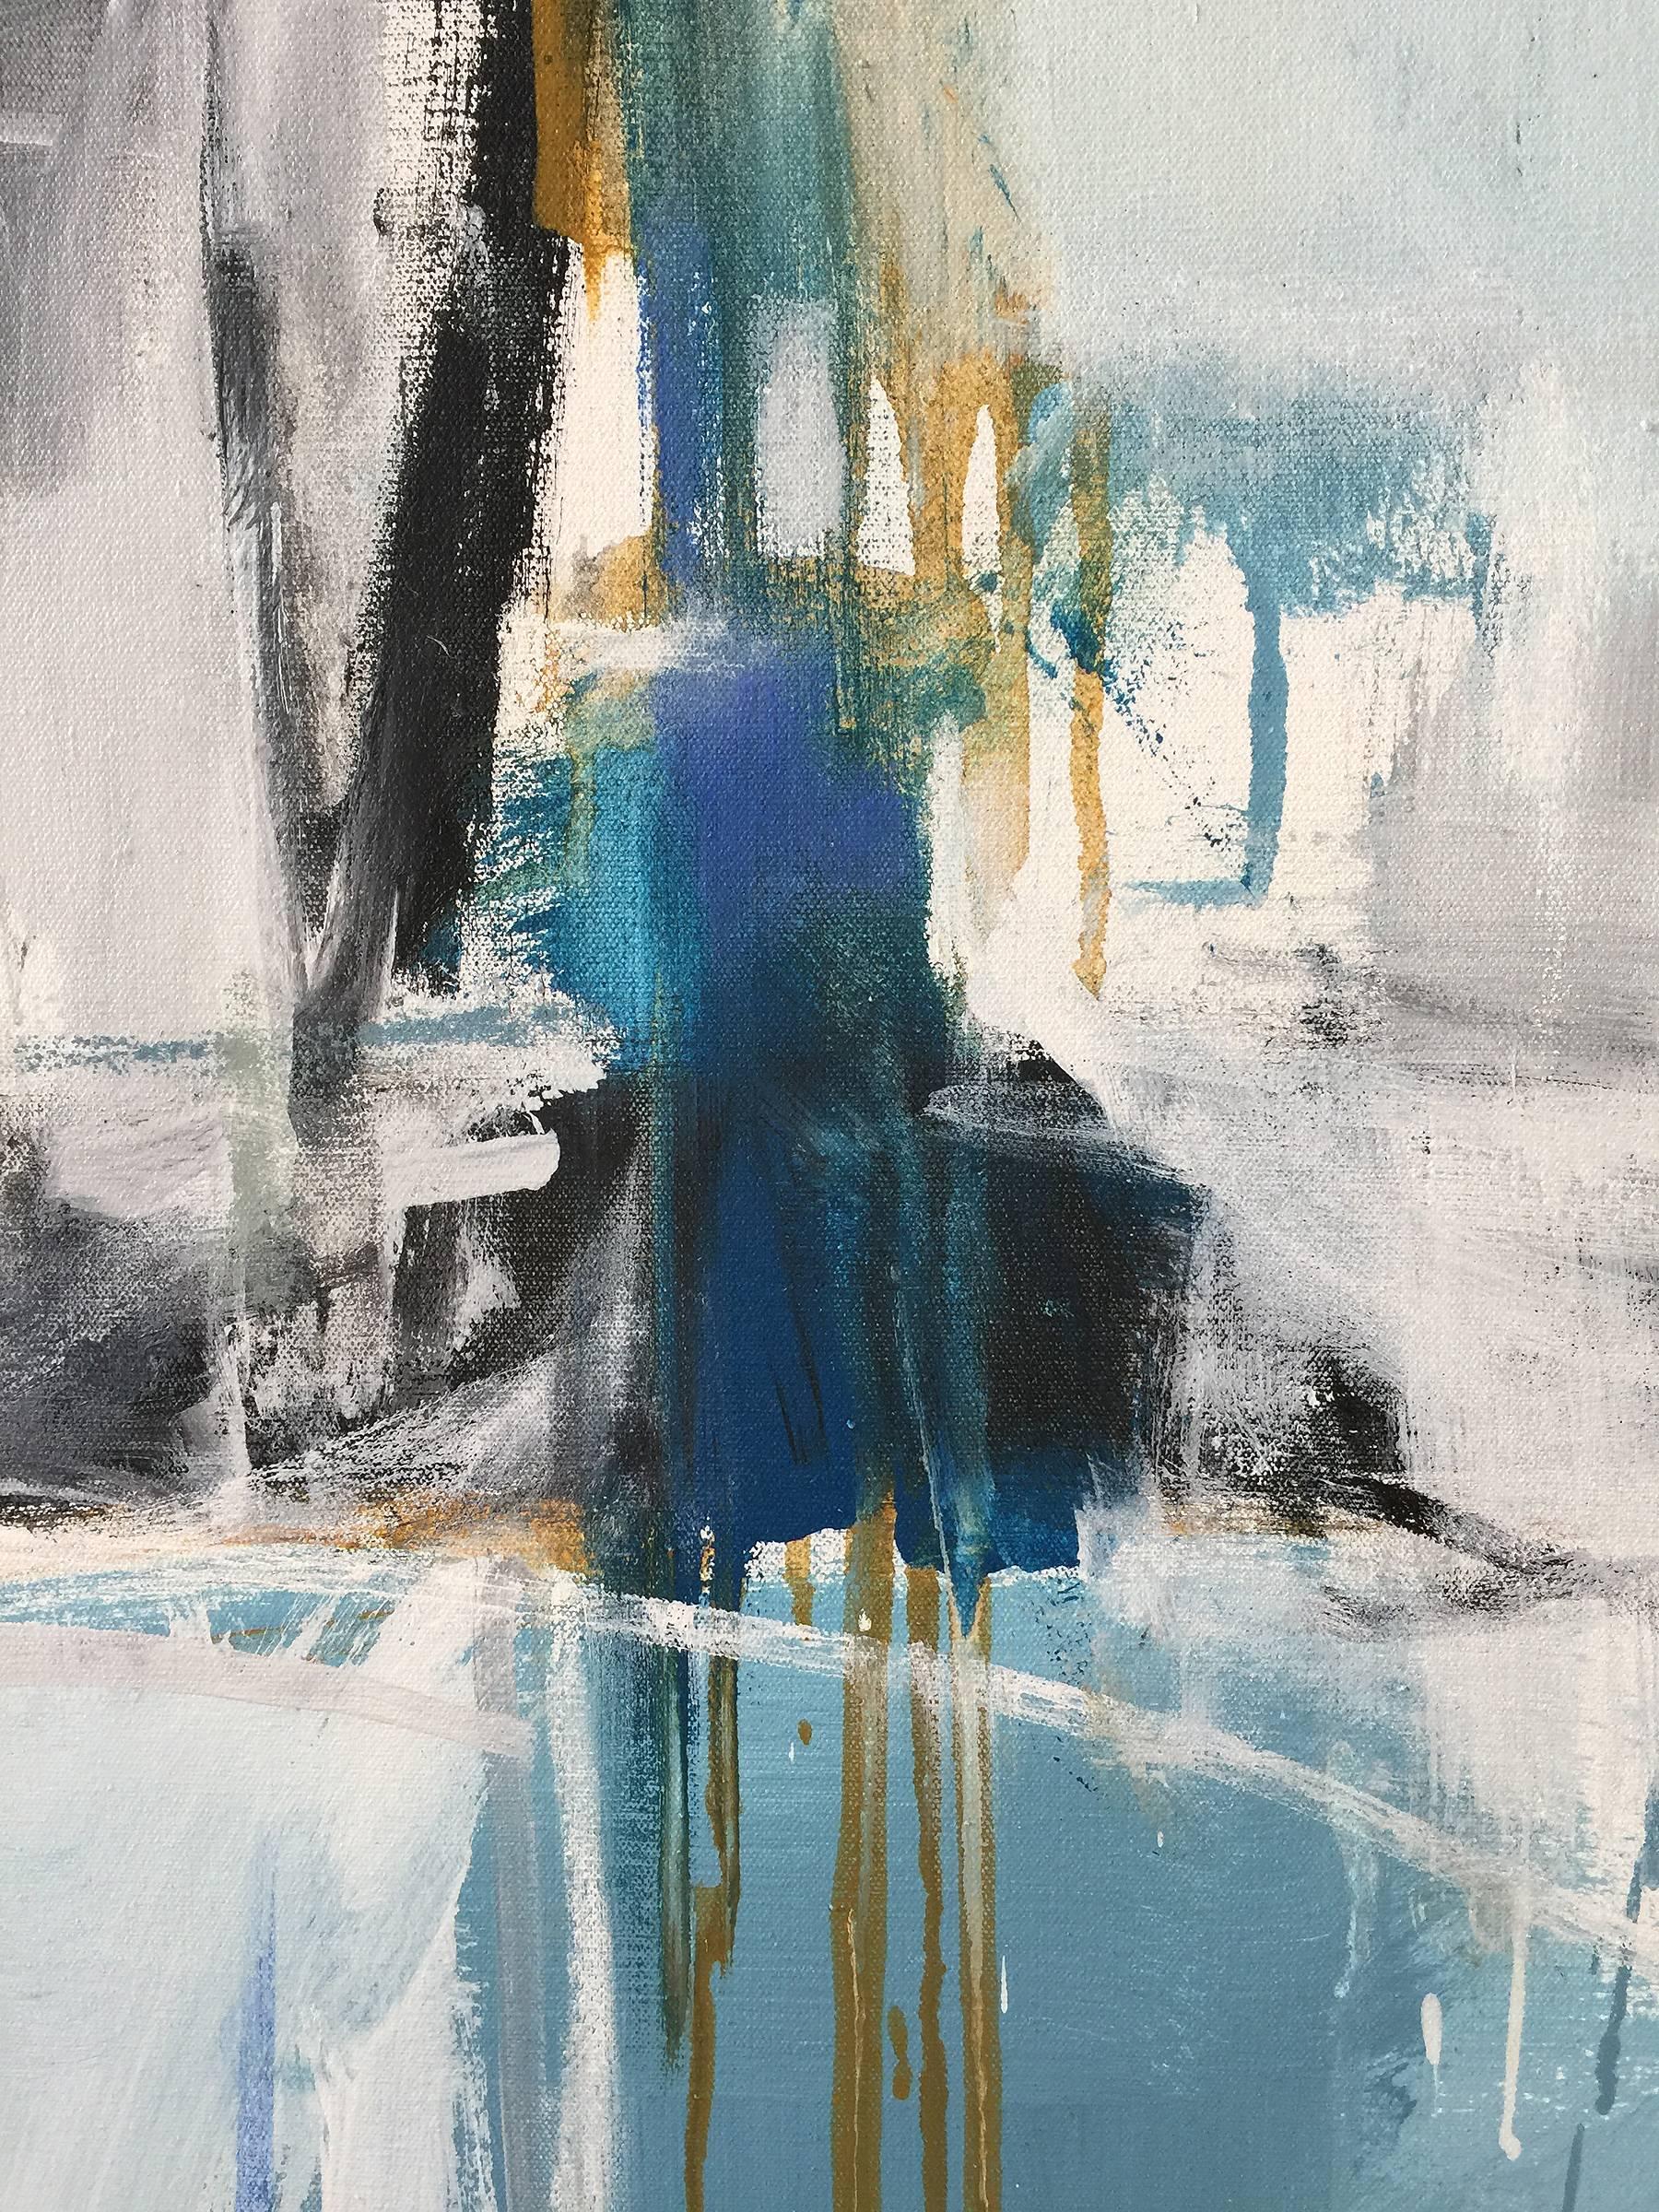 The Summer House - Gray Abstract Painting by Emilia Dubicki